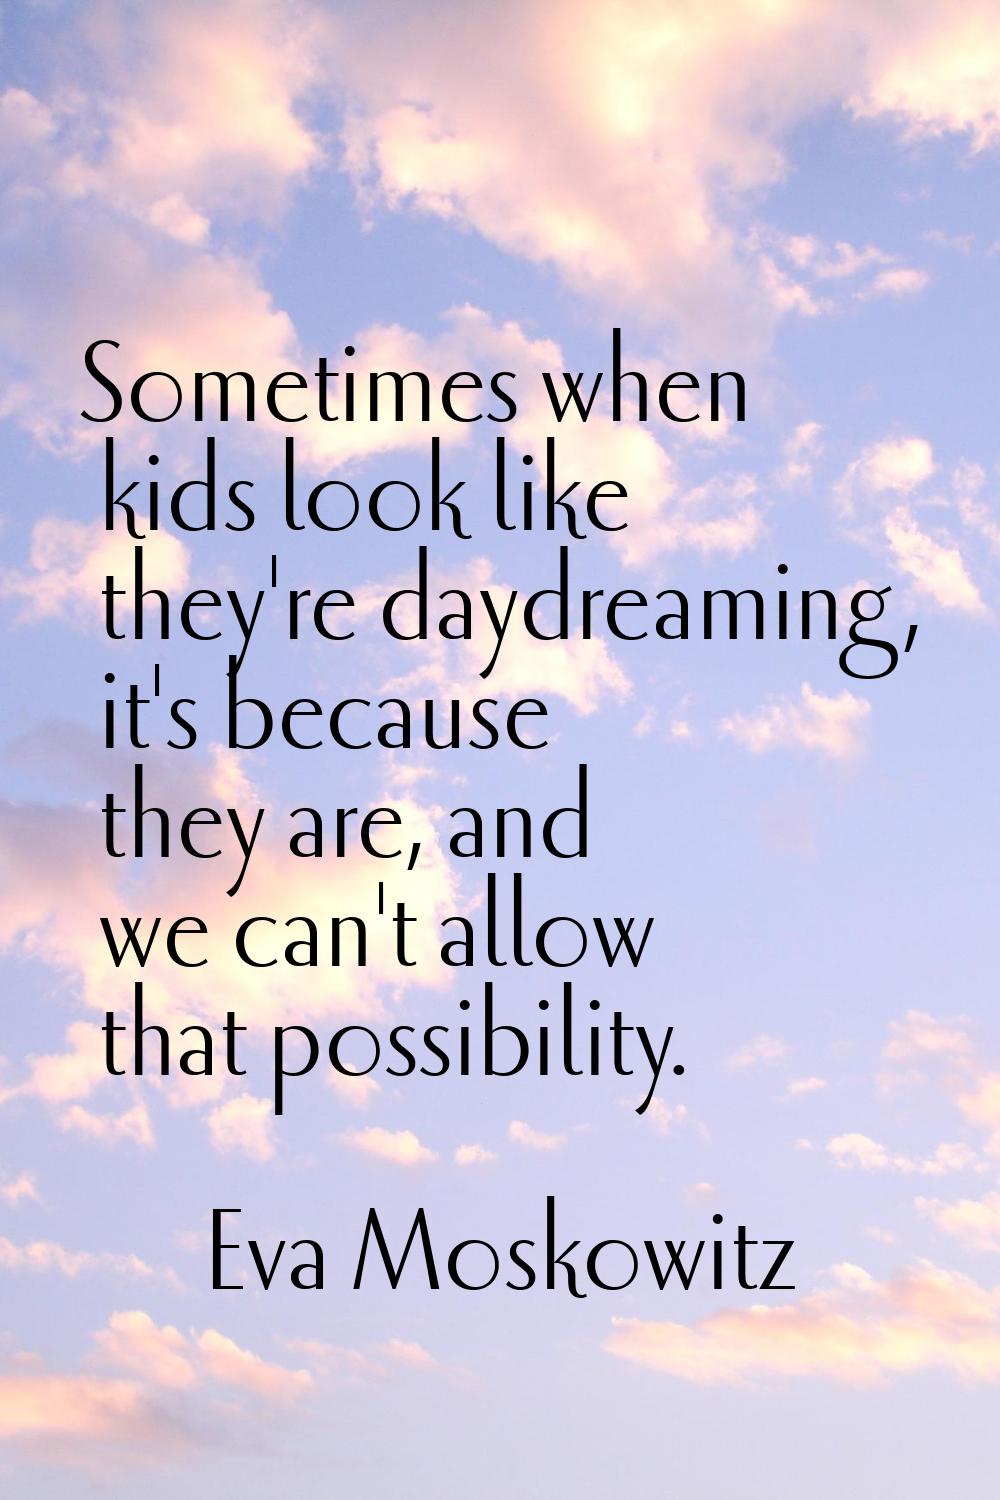 Sometimes when kids look like they're daydreaming, it's because they are, and we can't allow that p